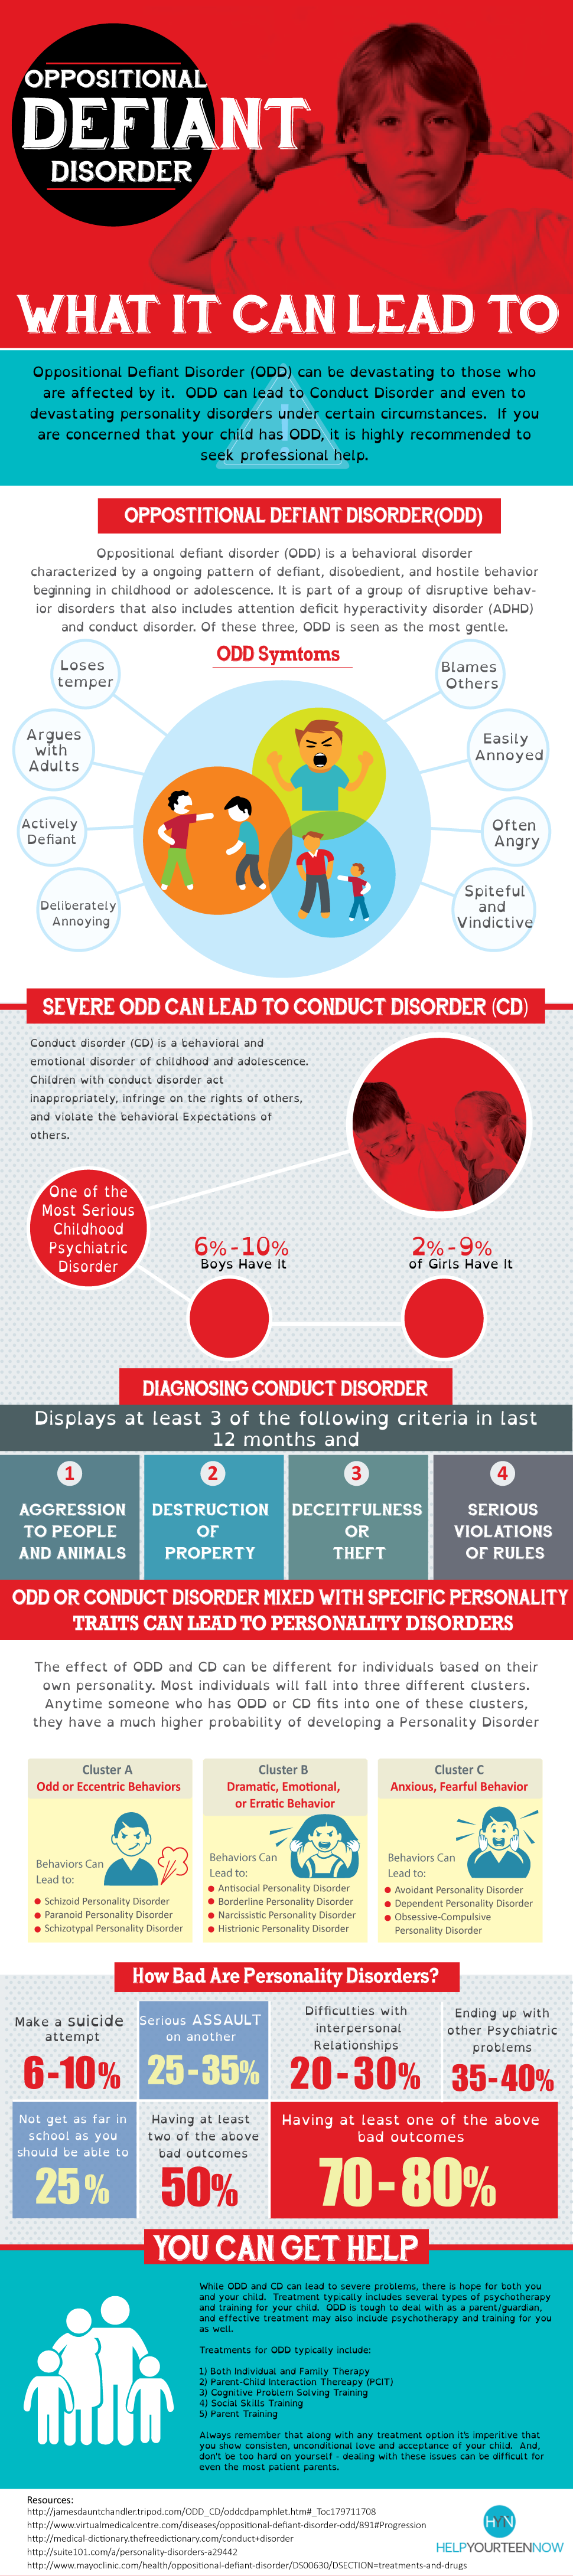 Oppositional Defiant Disorder - What It Can Lead To Infographic